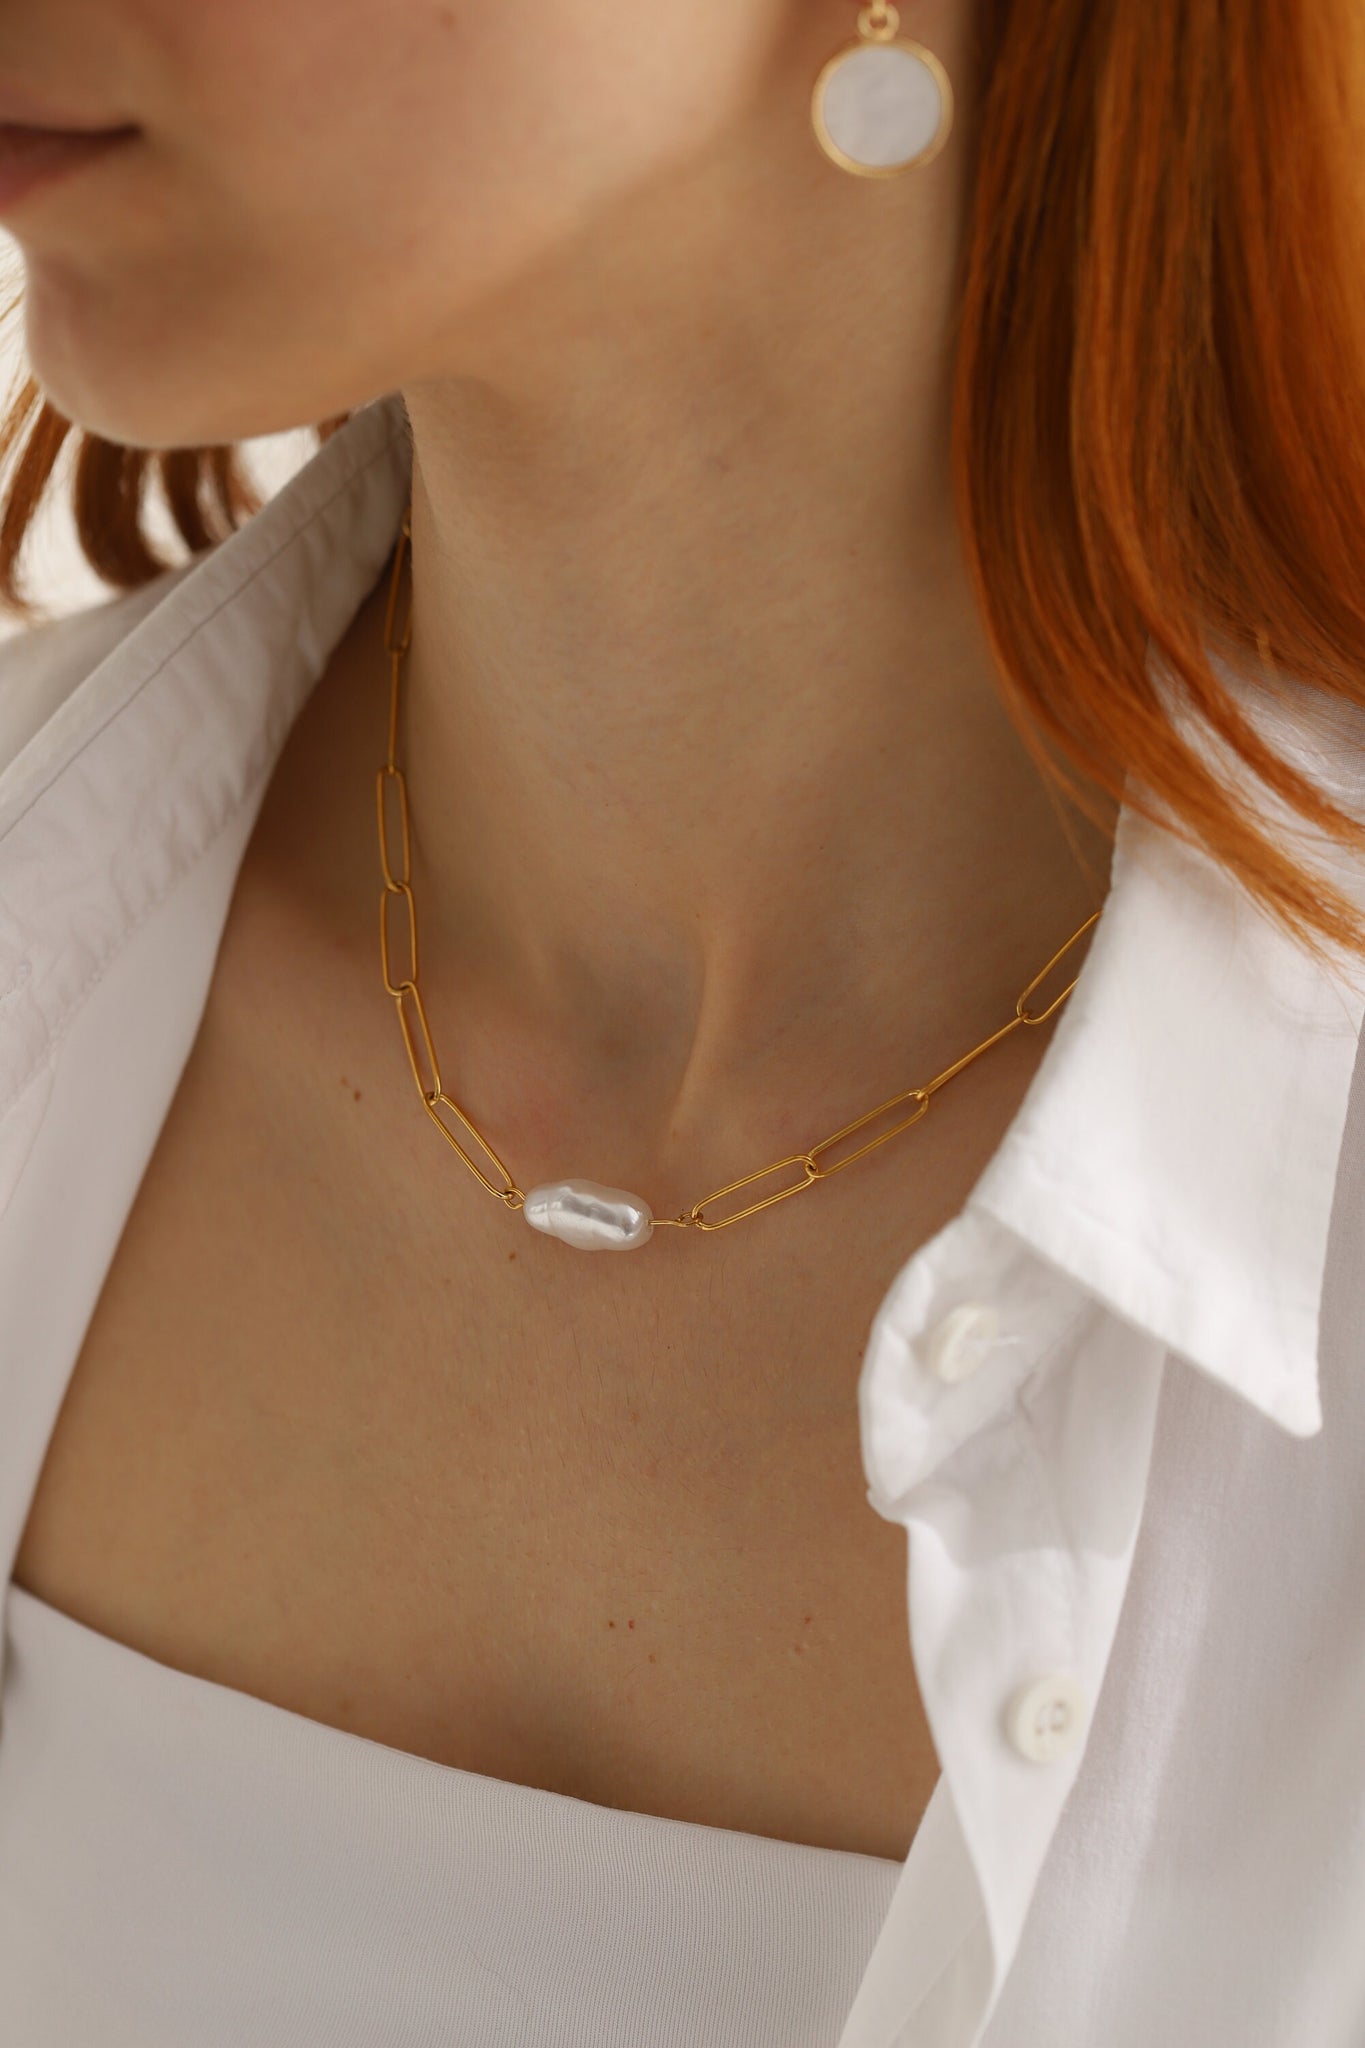 Baroque Pearl Necklace, 18K Gold, Mothers Day Gift, Gift For Her, Paperclip Chain Necklace, Fresh Water Pearl Necklace, Minimalist Necklace